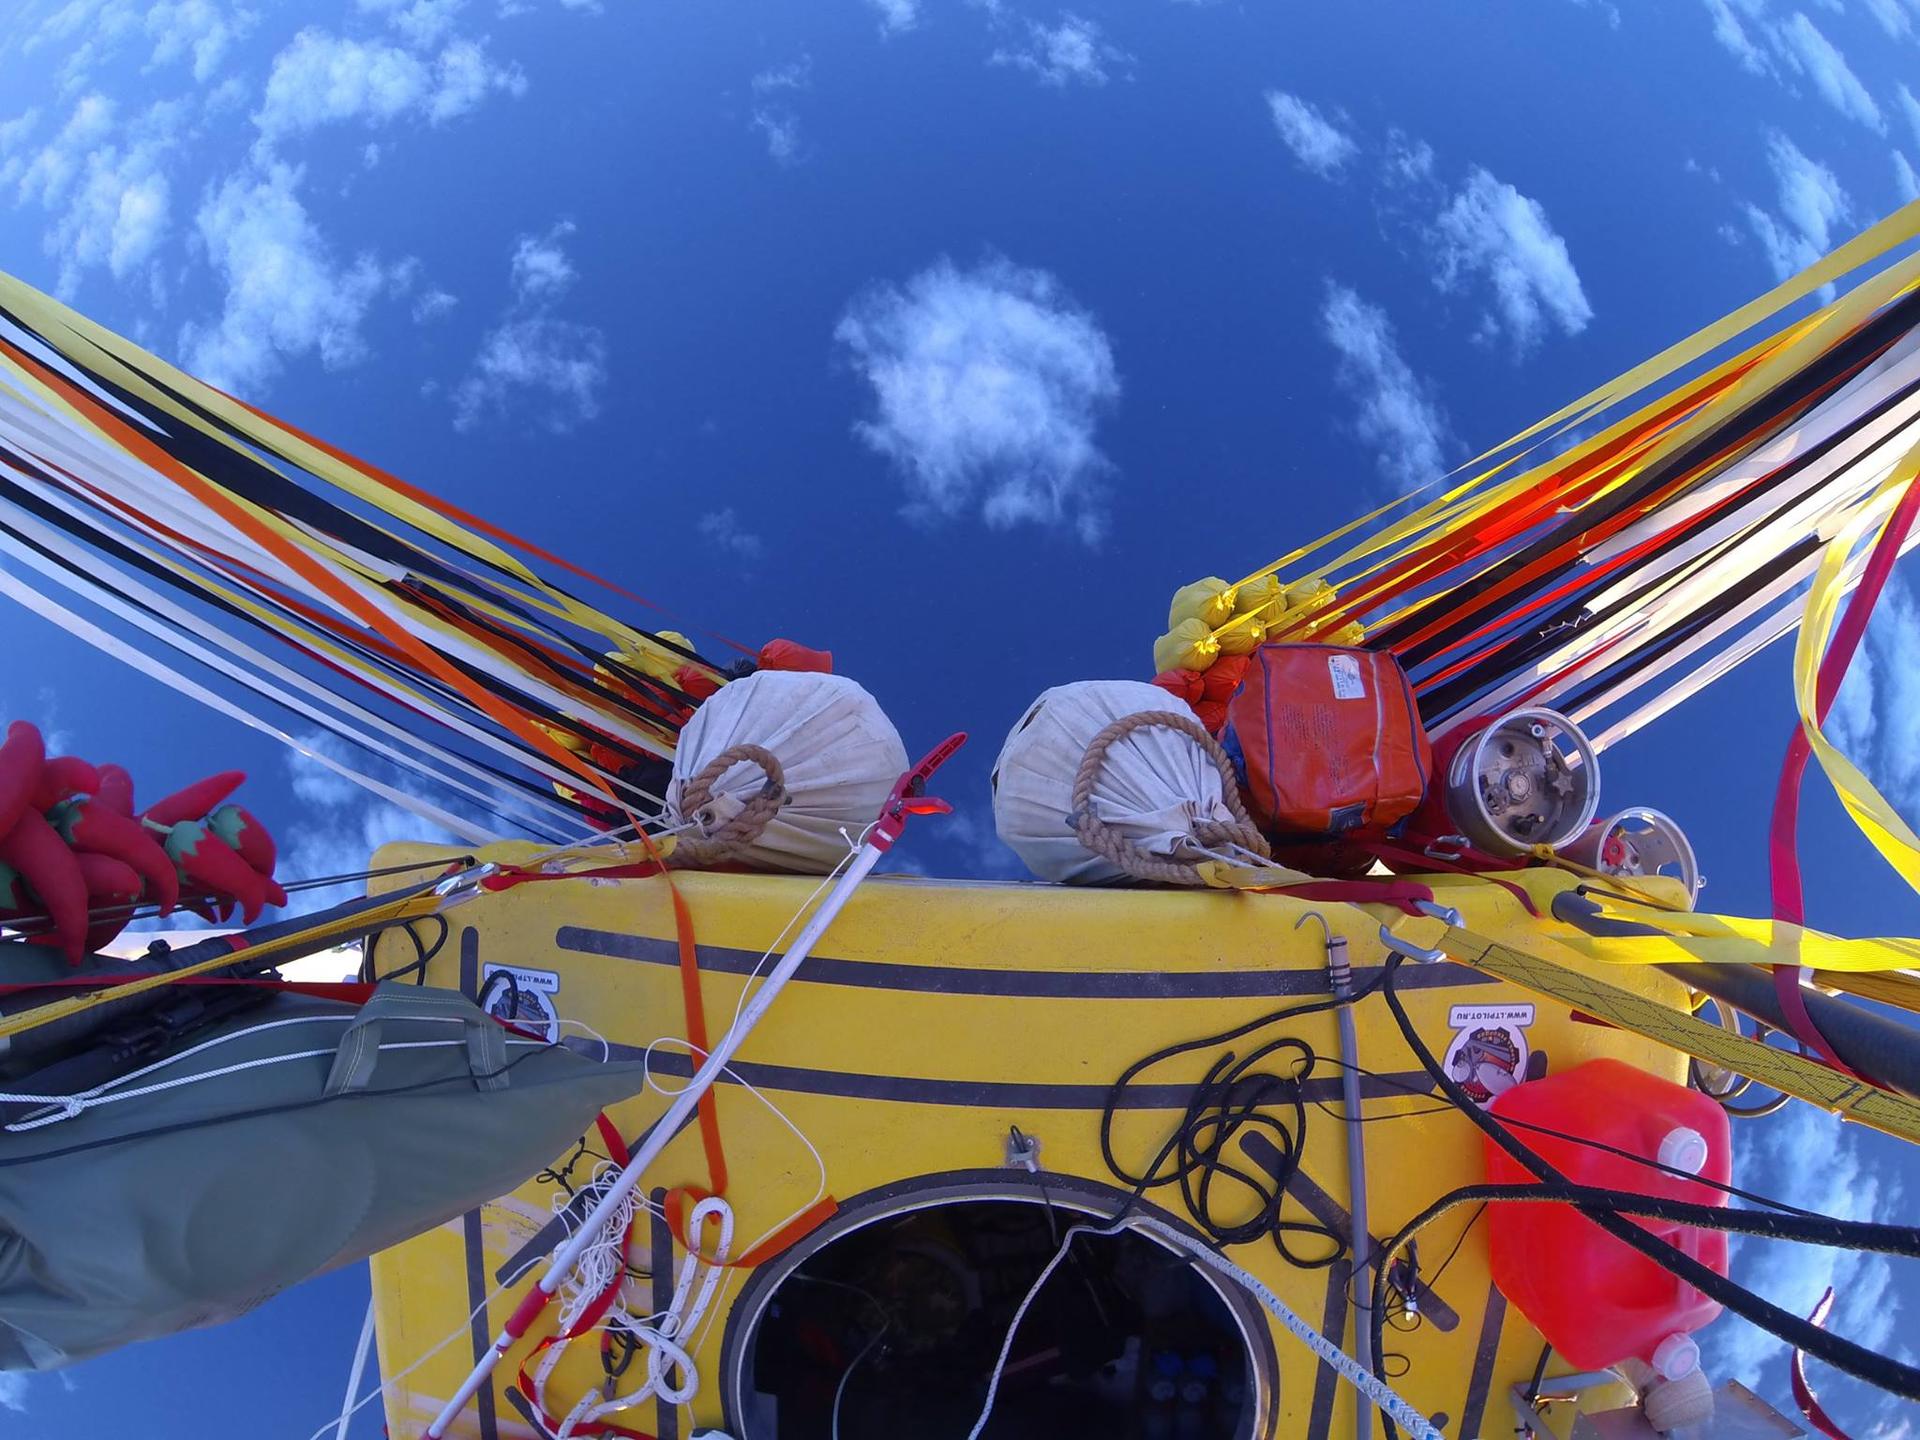 The view from 15,000 feet over the Pacific Ocean as seen from the Two Eagles Balloon flight deck.